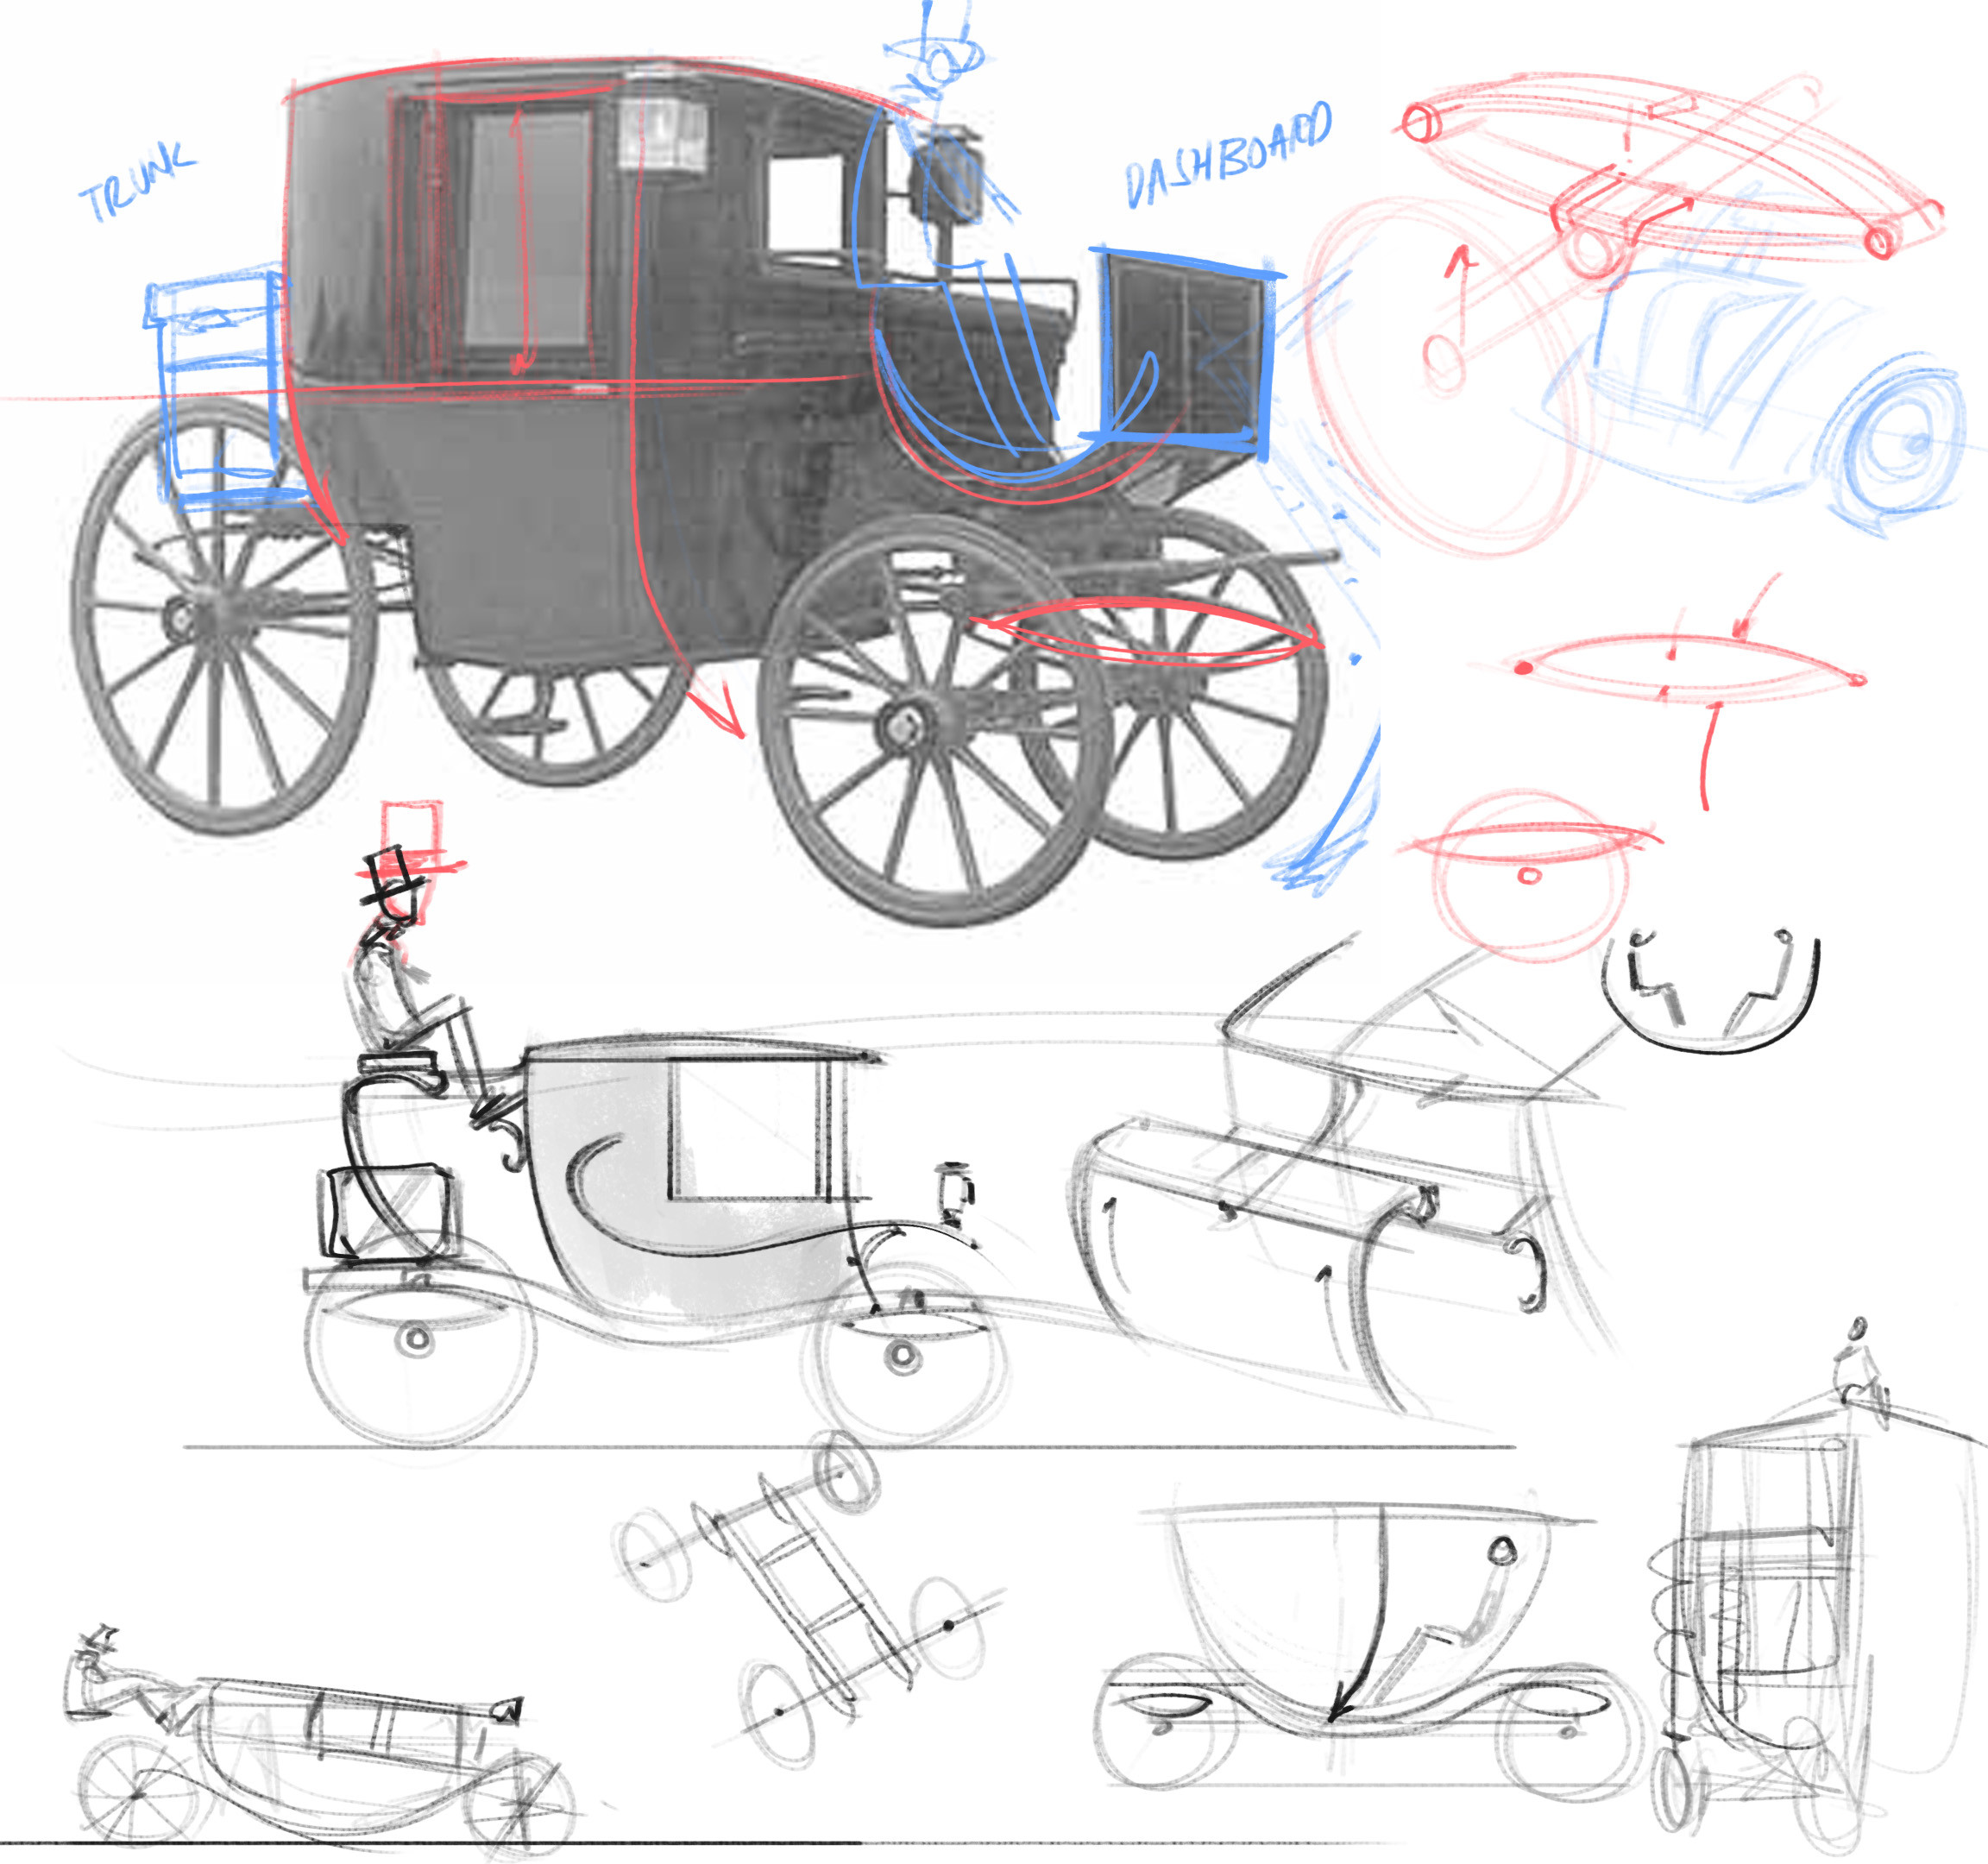 Discussion about Victorian carriages